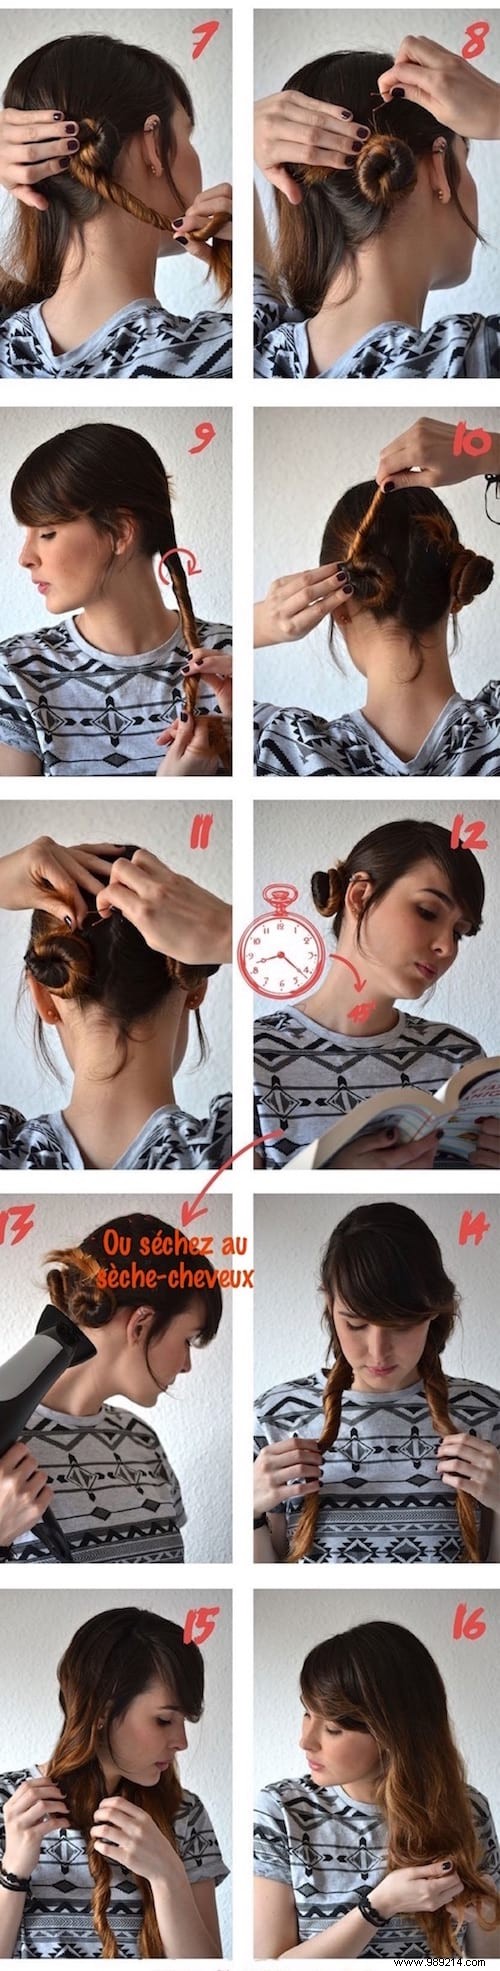 10 Hairdresser Tips to Curl Your Hair WITHOUT a Curling Iron. 